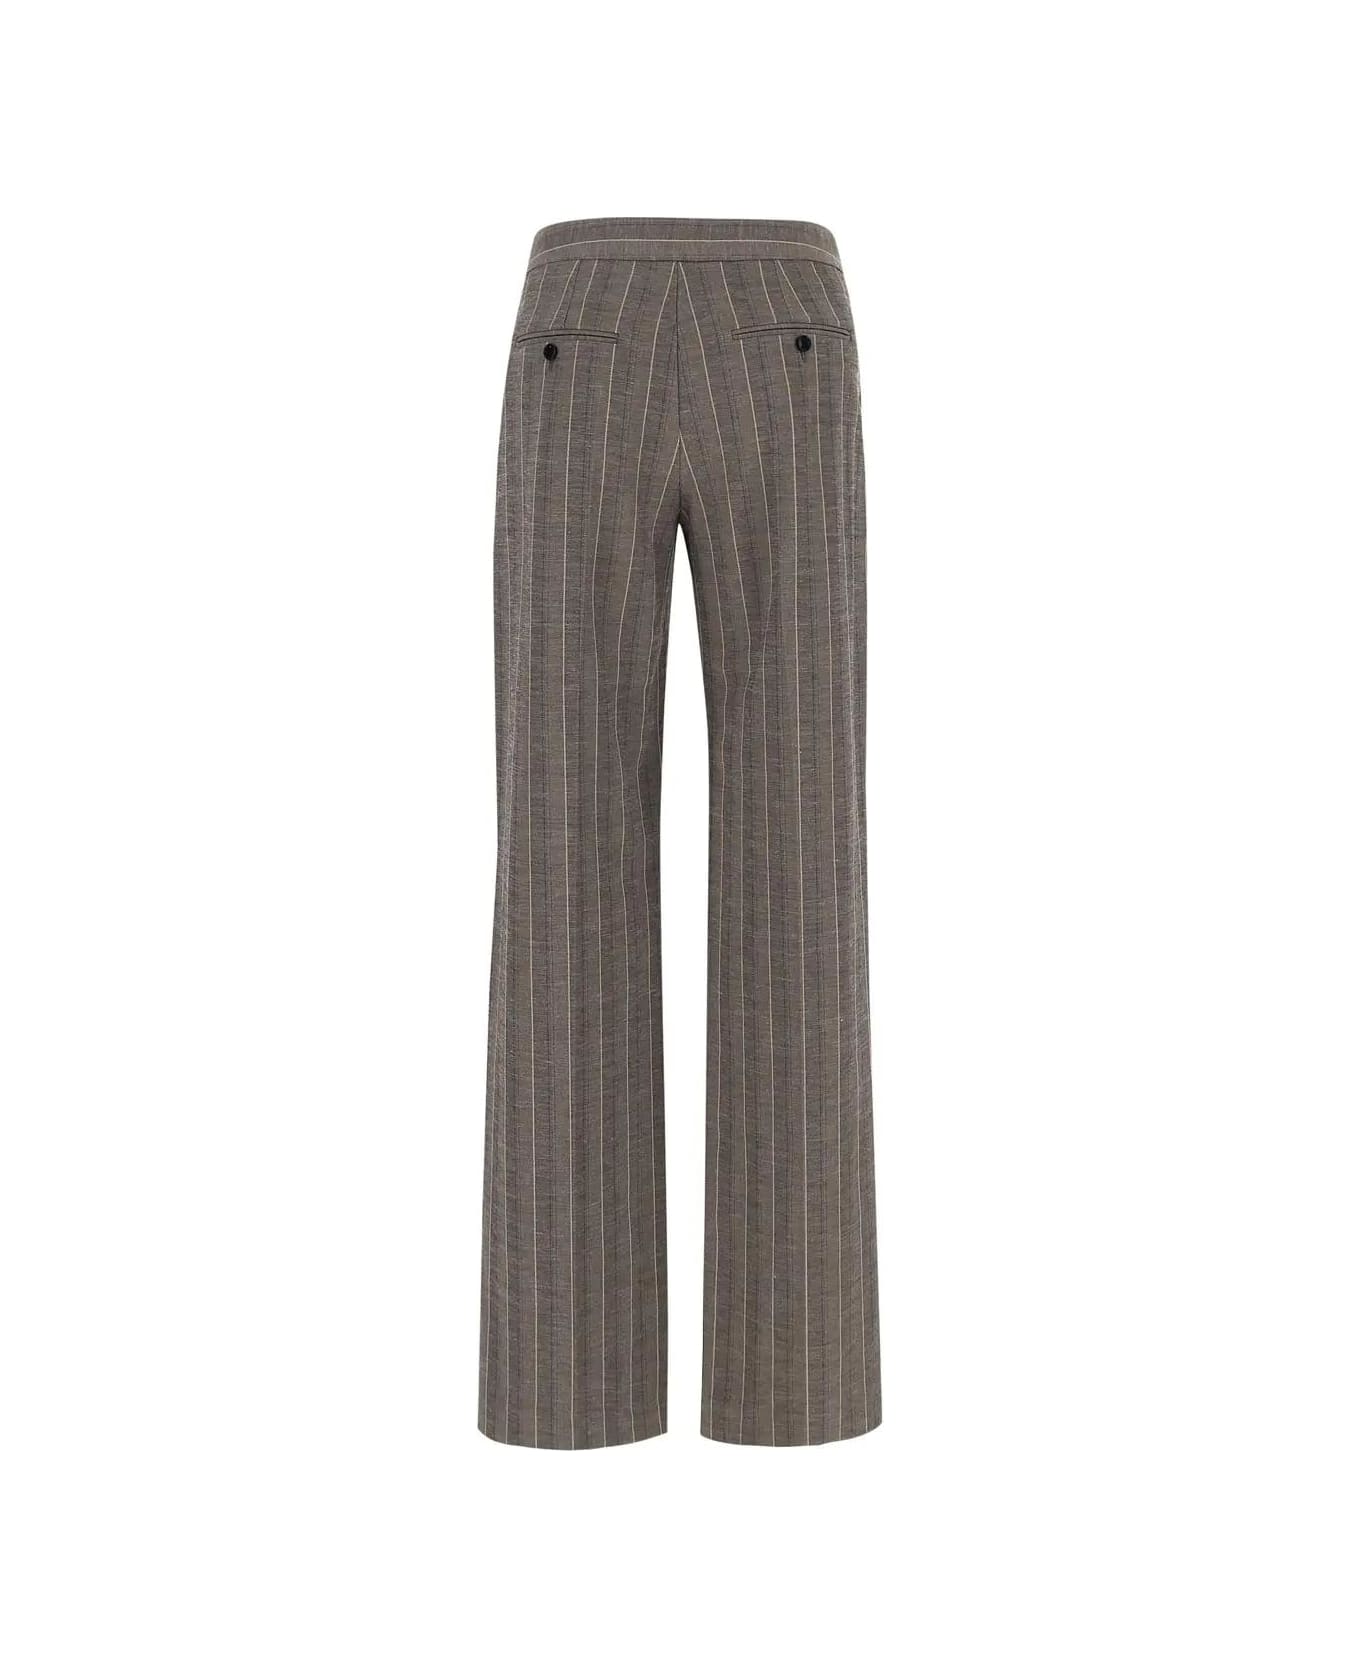 Isabel Marant Scarly Trousers - Gy Grey